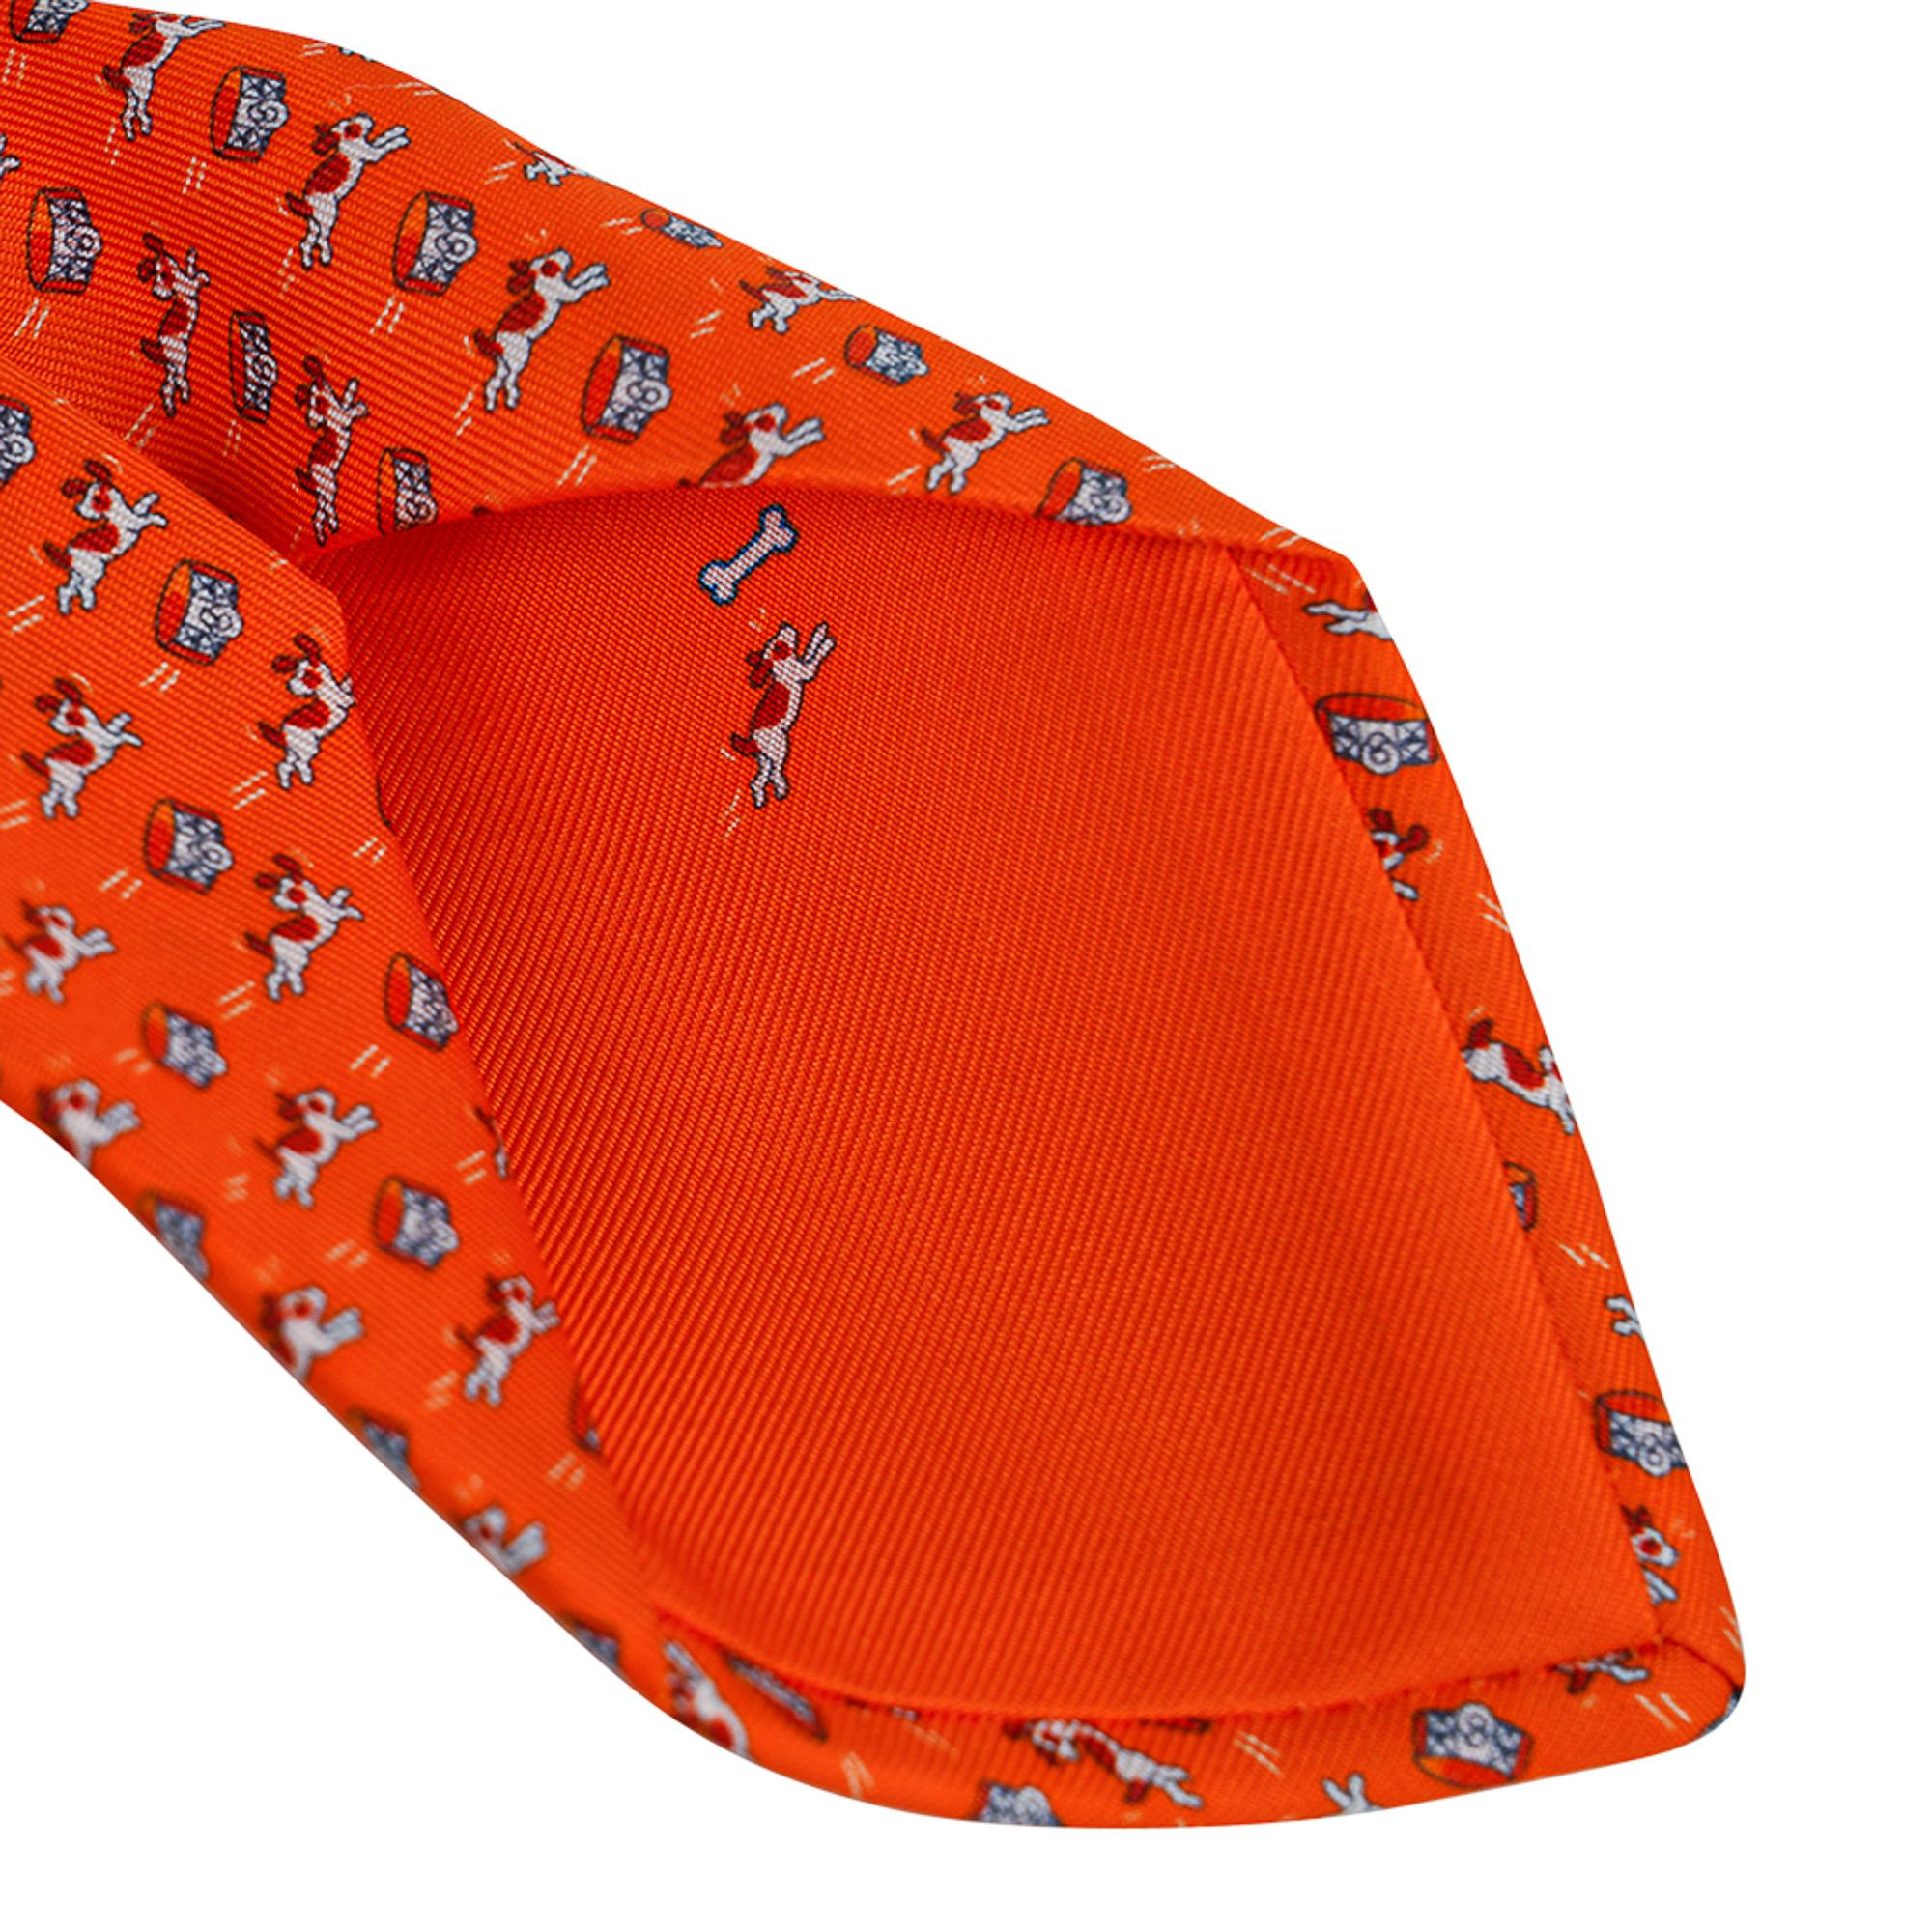 Mightychic offers an Hermes Oh My Dog Tie featured in Orange Vif, Blanc and Terracotta.
Hand-sewn silk twill.
Sweet surprise in the lining of the tie!
Designed by Philippe Mouquet.
Made in France
NEW or NEVER WORN.
final sale

TIE MEASURES:
WIDTH